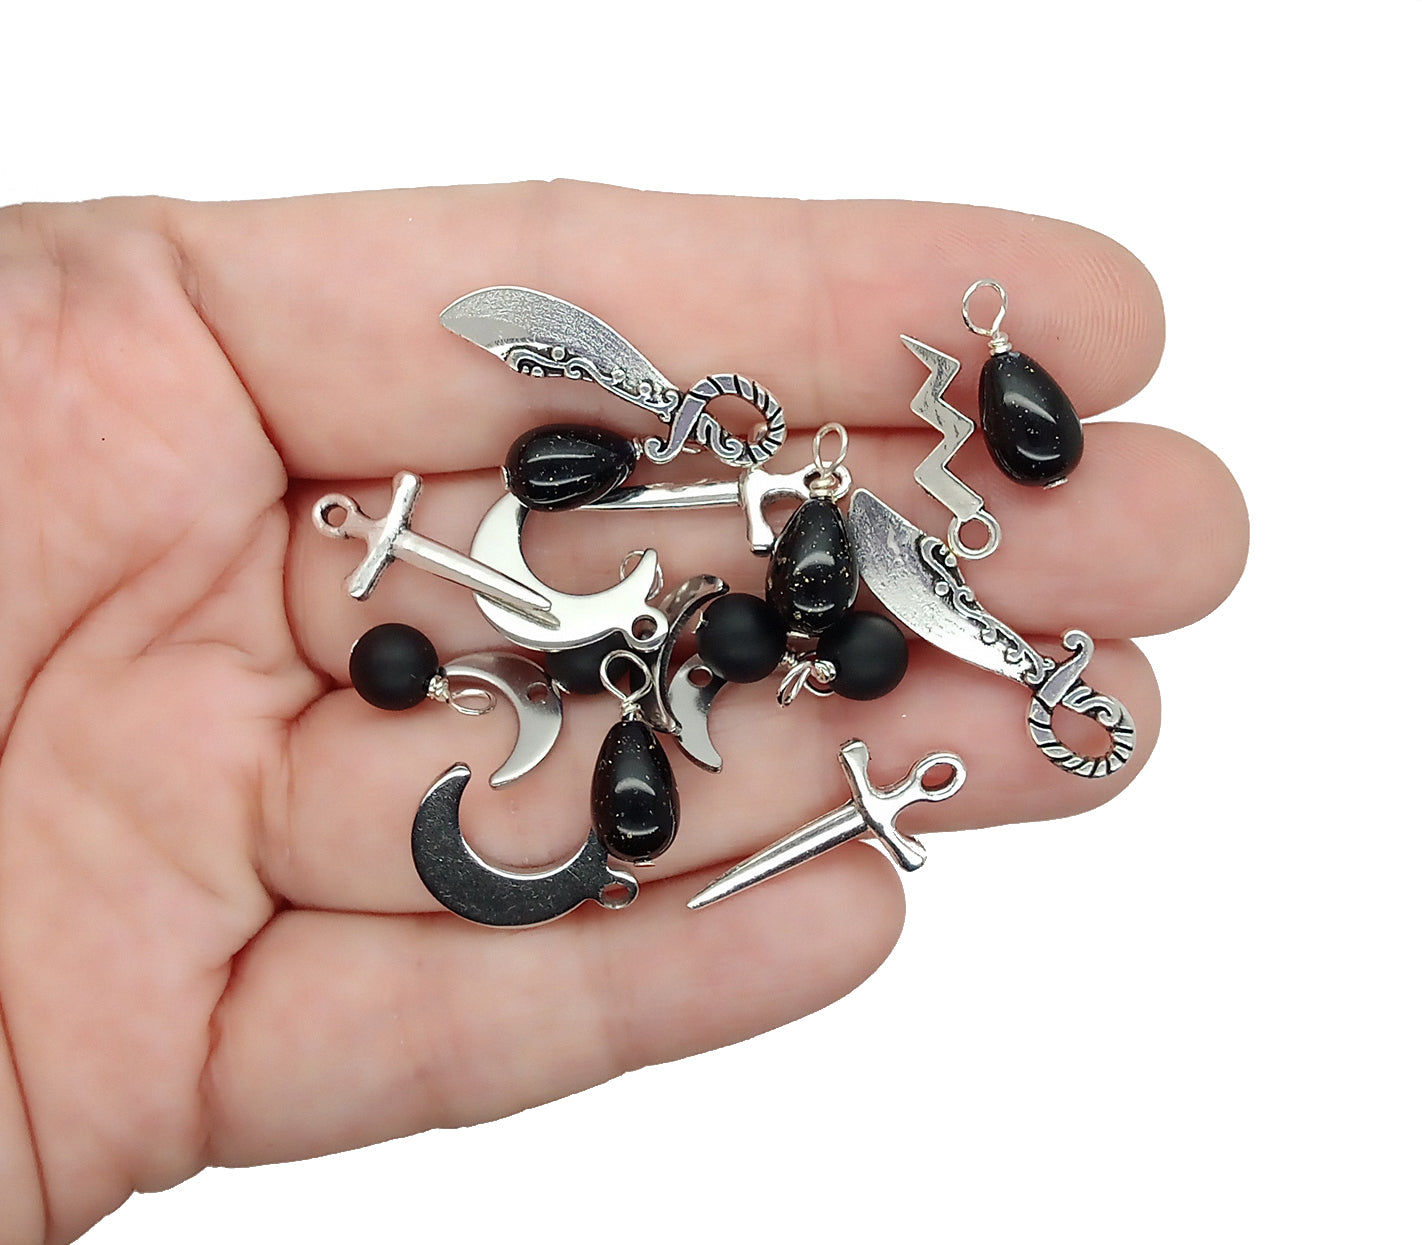 Halloween Charm Mix: Moons, Knives, and Black Bead Dangles